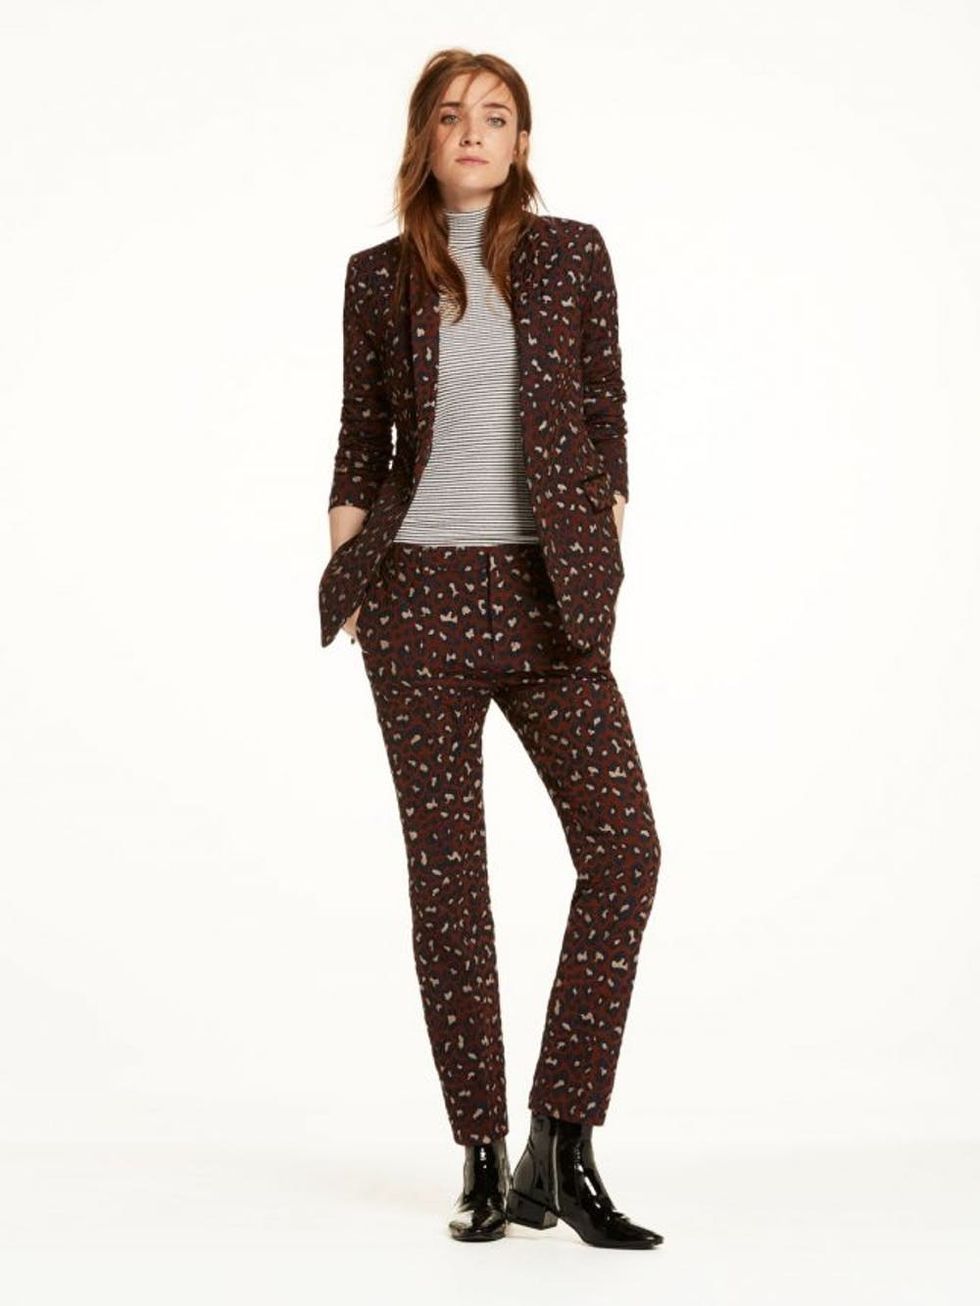 18 Power Pantsuits You’ll *Actually* Want to Wear - Brit + Co